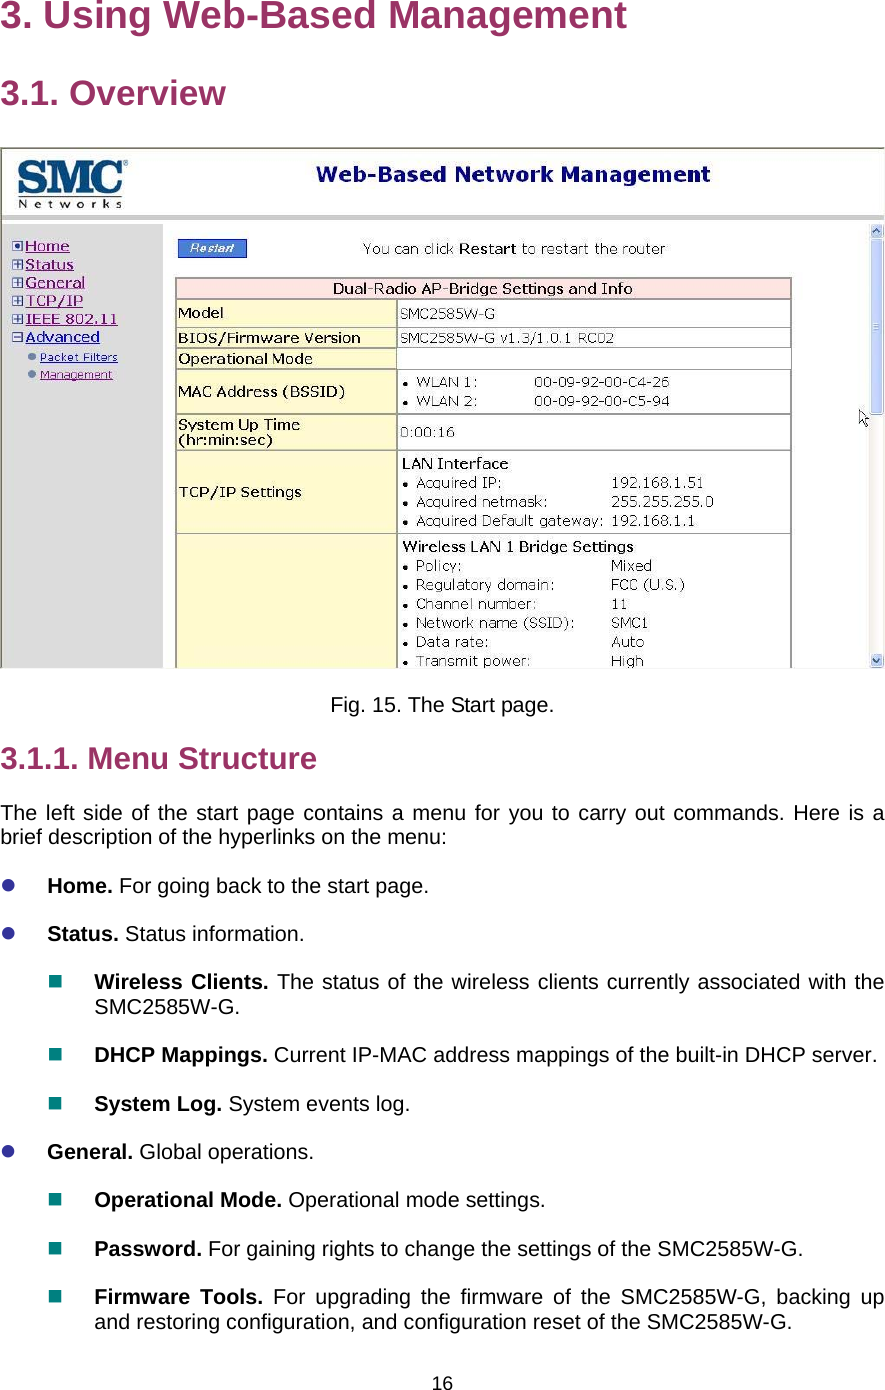   163. Using Web-Based Management 3.1. Overview  Fig. 15. The Start page. 3.1.1. Menu Structure The left side of the start page contains a menu for you to carry out commands. Here is a brief description of the hyperlinks on the menu: z Home. For going back to the start page. z Status. Status information.  Wireless Clients. The status of the wireless clients currently associated with the SMC2585W-G.  DHCP Mappings. Current IP-MAC address mappings of the built-in DHCP server.  System Log. System events log. z General. Global operations.  Operational Mode. Operational mode settings.  Password. For gaining rights to change the settings of the SMC2585W-G.  Firmware Tools. For upgrading the firmware of the SMC2585W-G, backing up and restoring configuration, and configuration reset of the SMC2585W-G. 